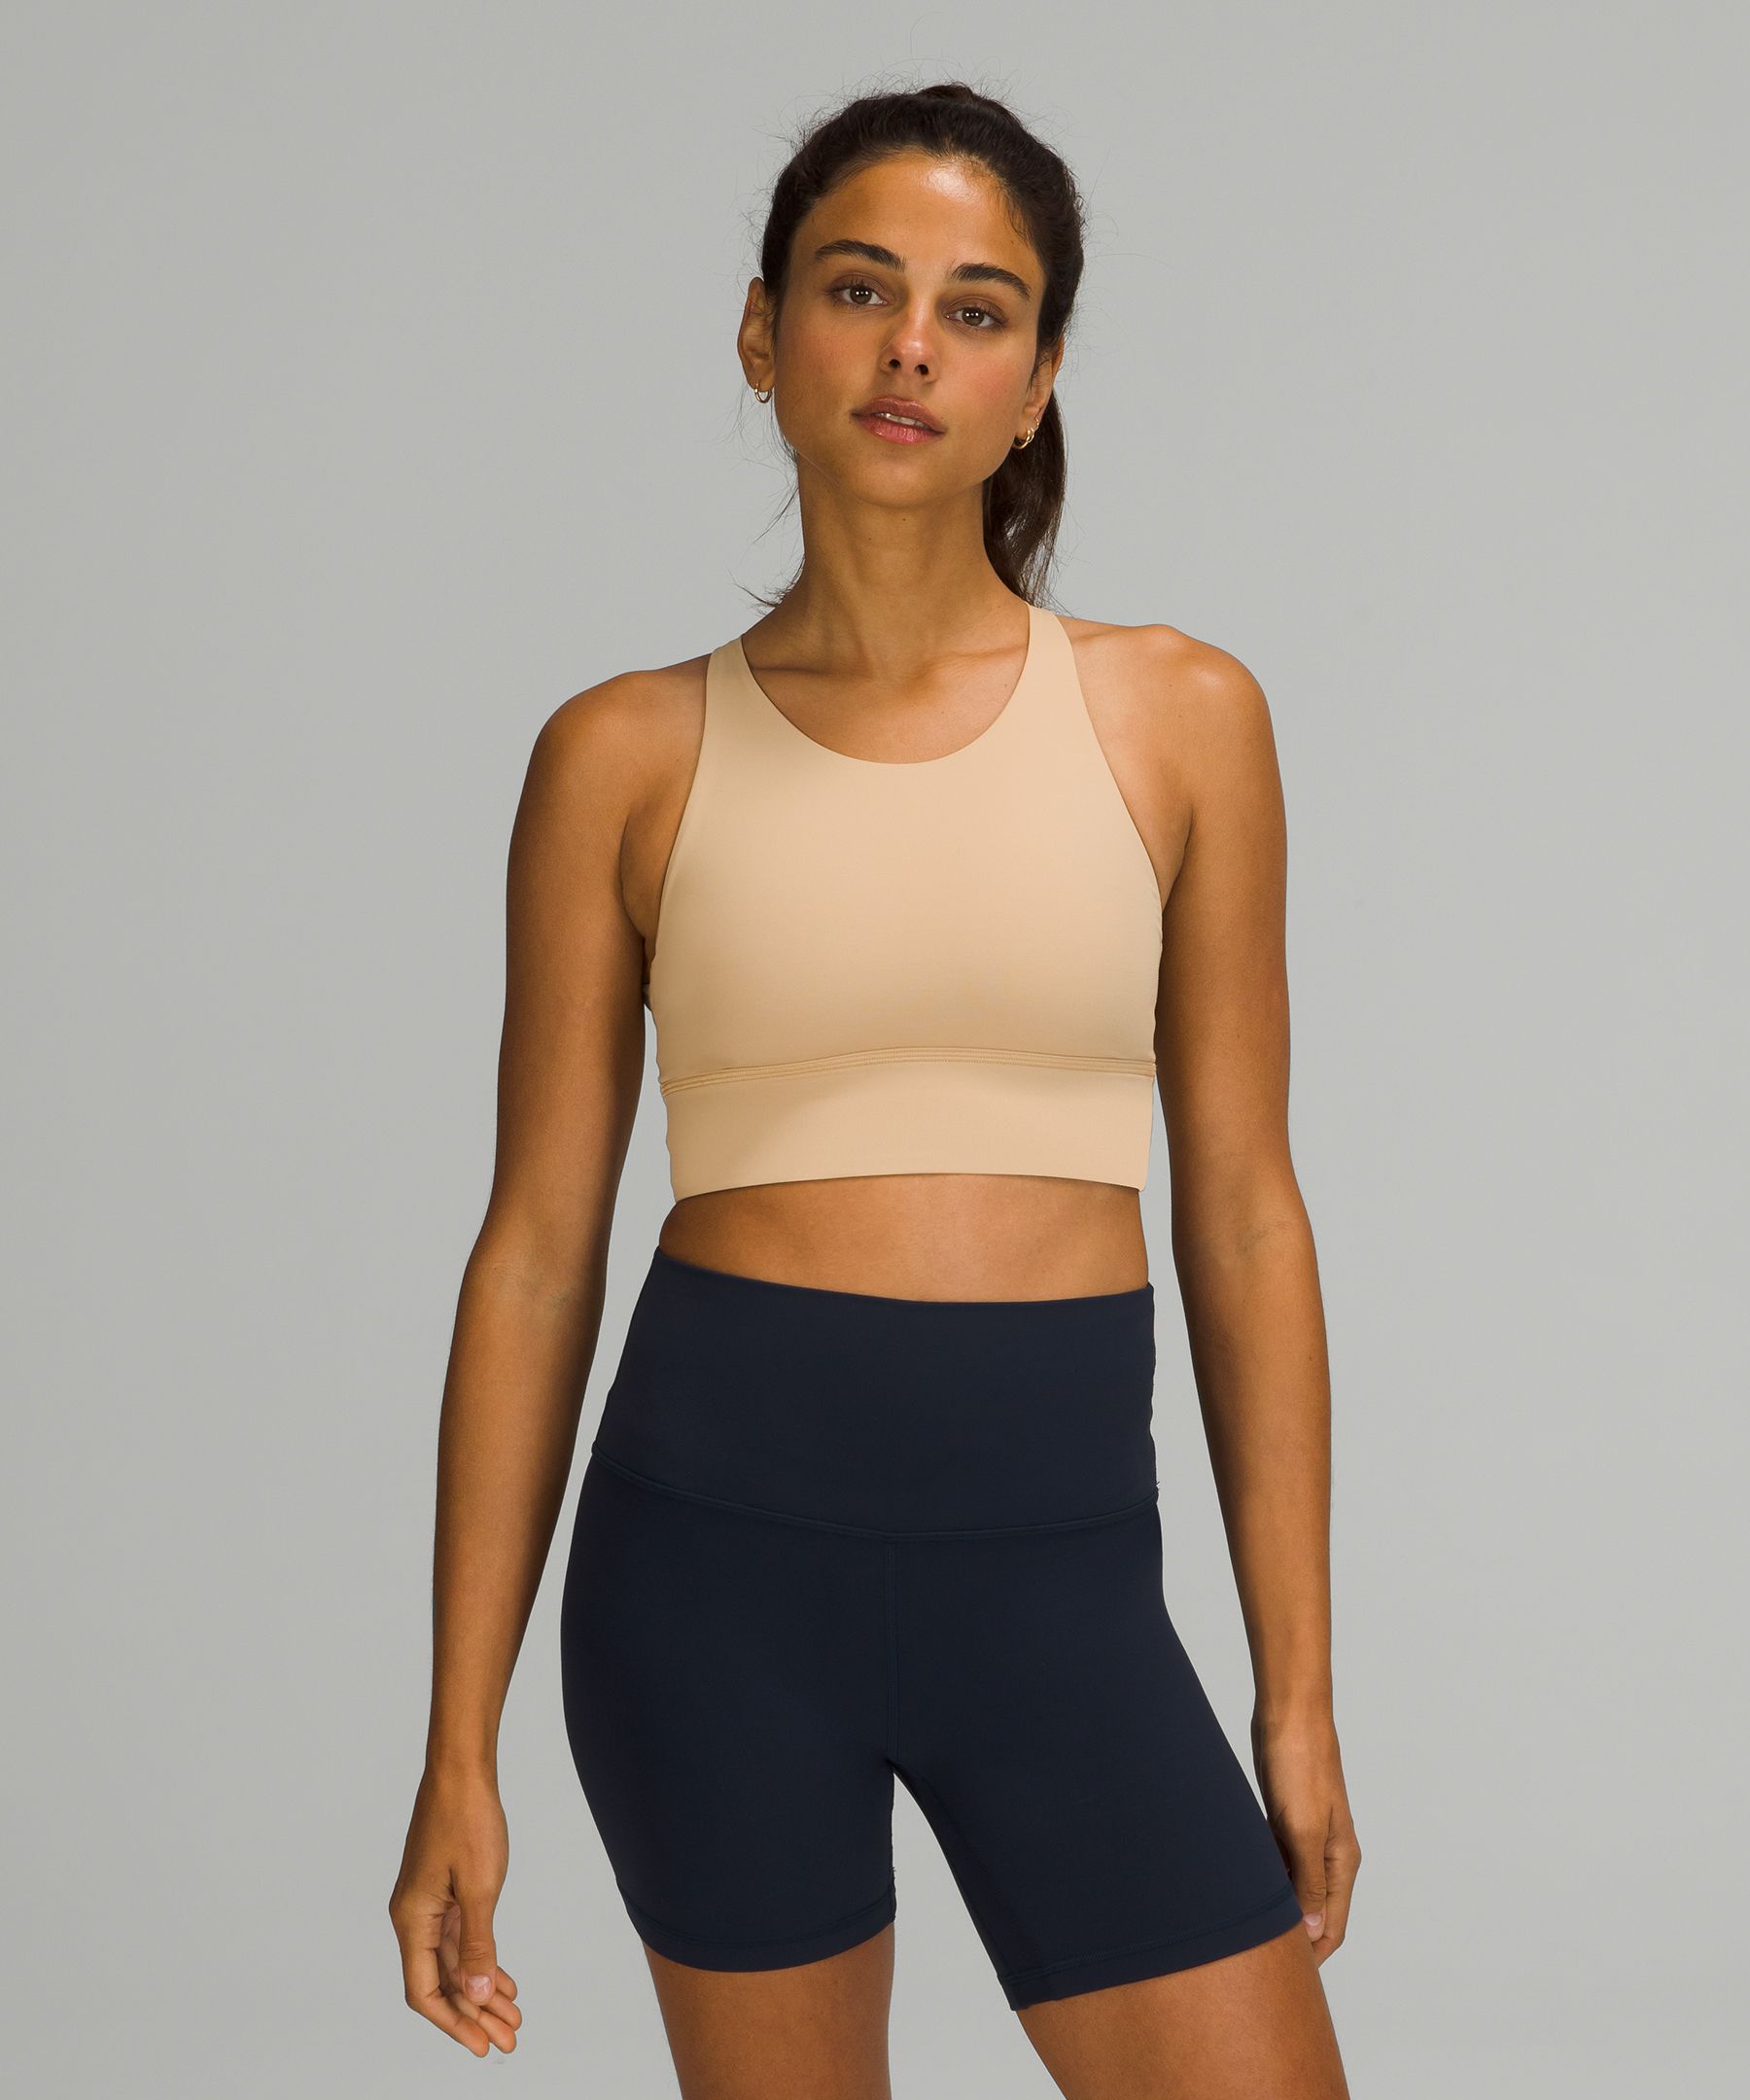 Lululemon Wild Light Support, A/b Cup In Pecan Tan